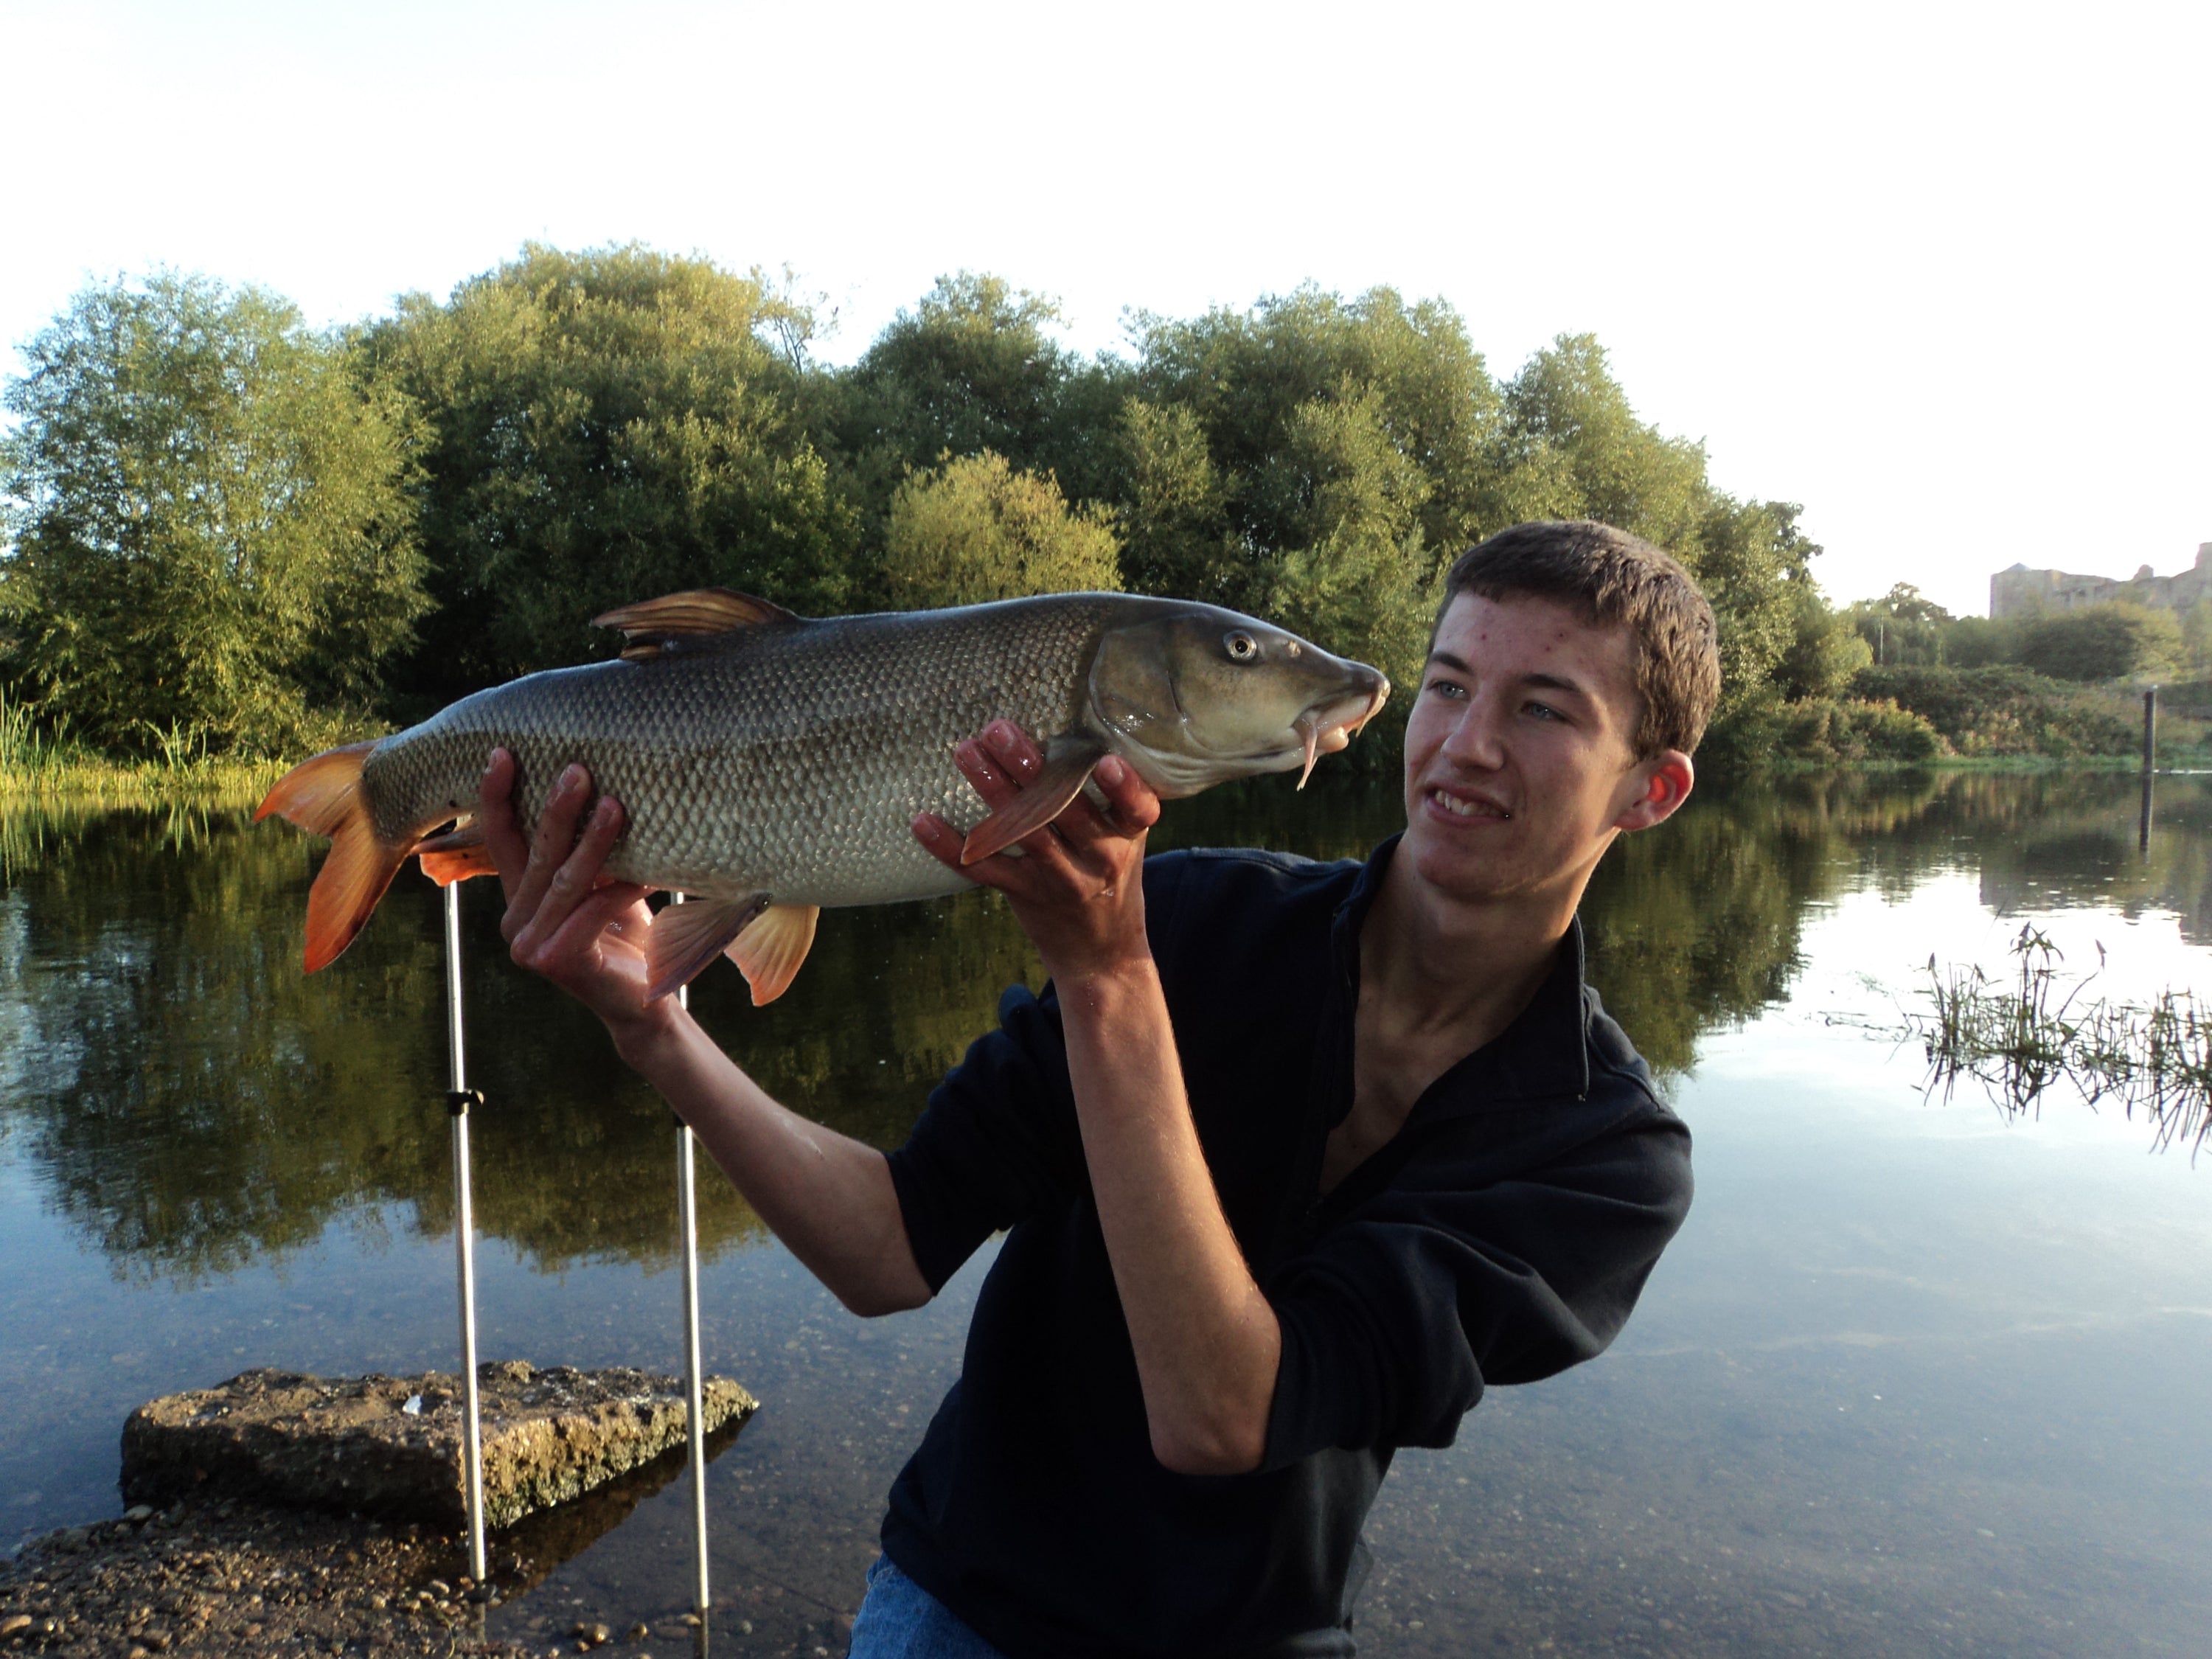 Liam with a Barbel caught on the River Trent at Bob's Island